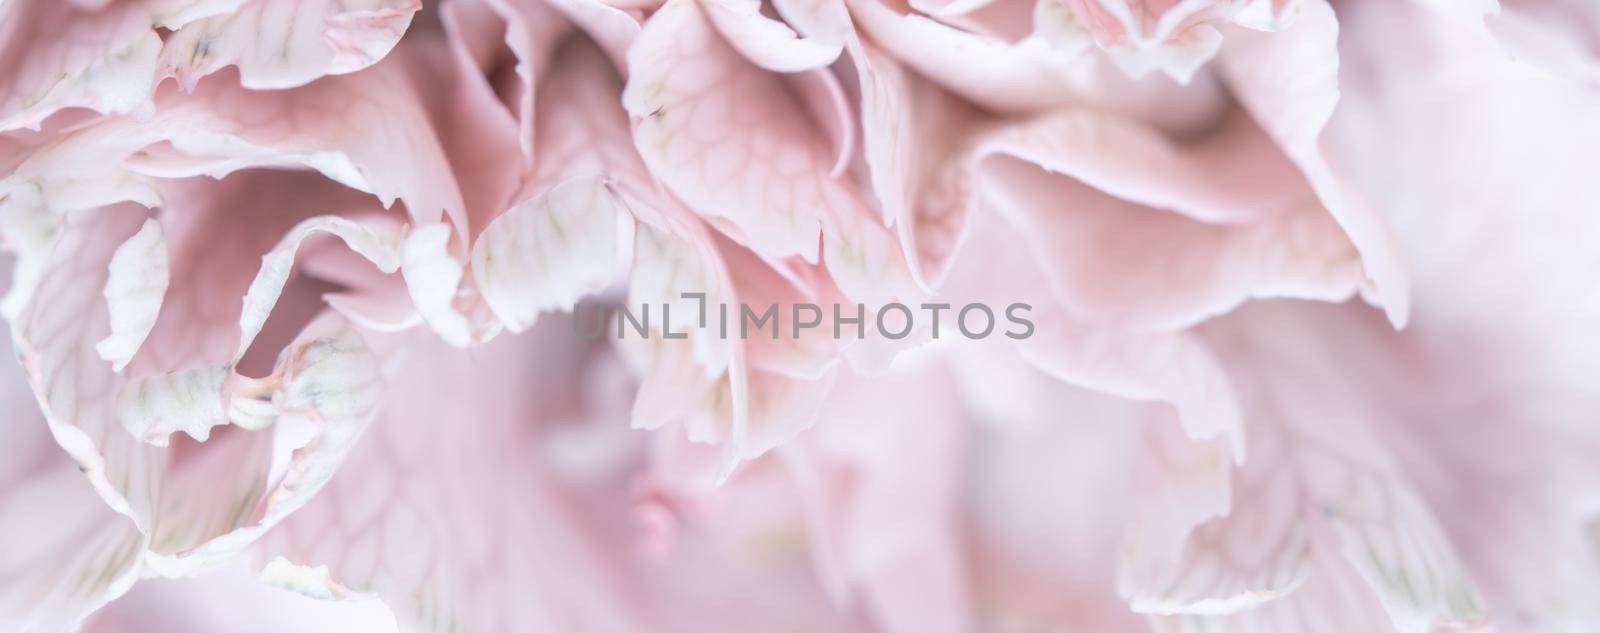 Abstract floral background, pale pink carnation flower petals. Macro flowers backdrop for holiday brand design by Olayola